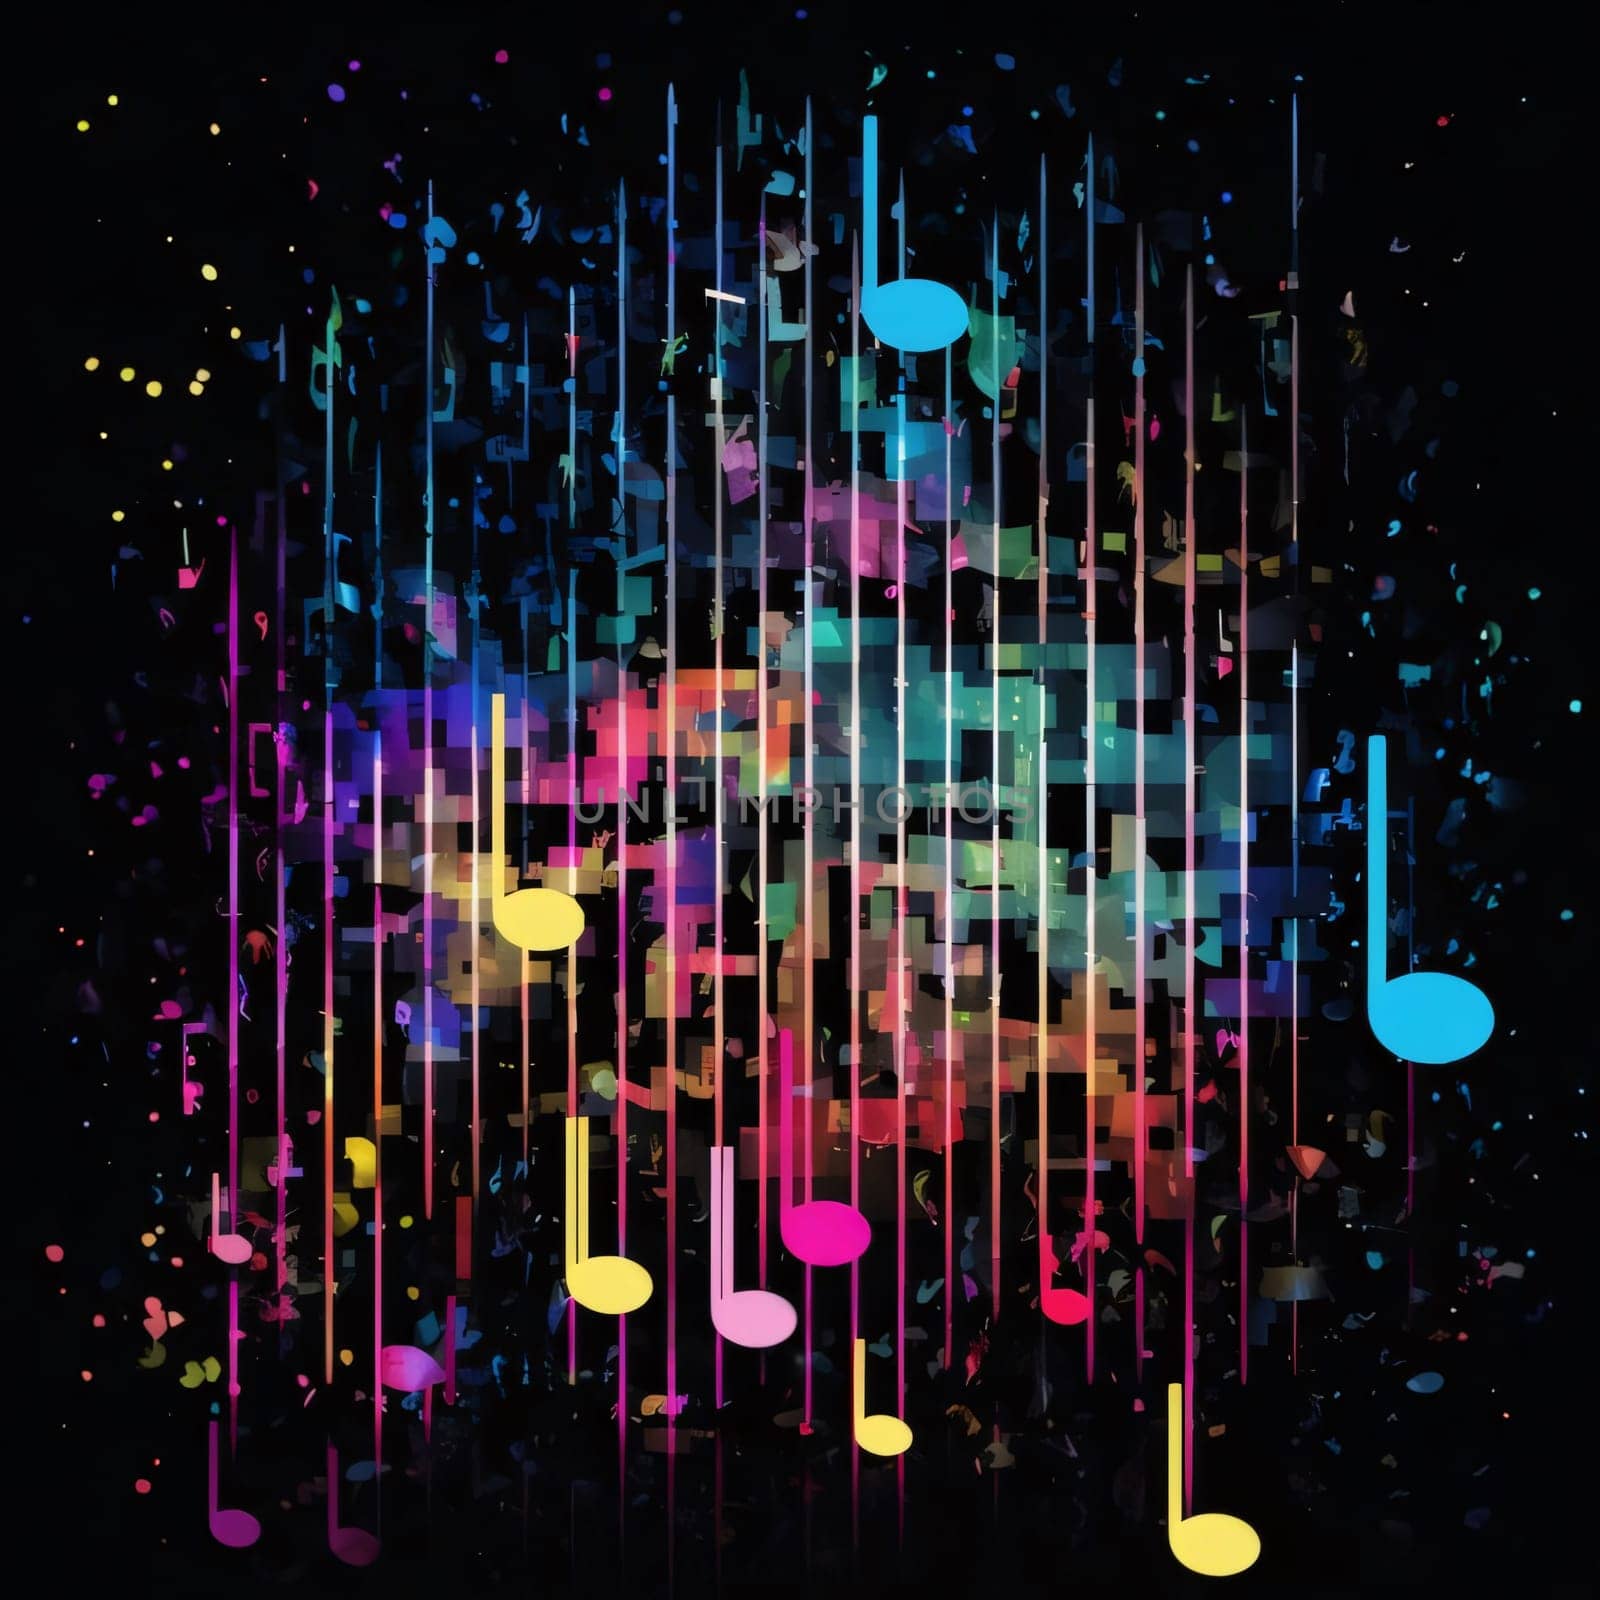 Abstract background design: Colorful music notes on a dark background. Vector illustration. Eps 10